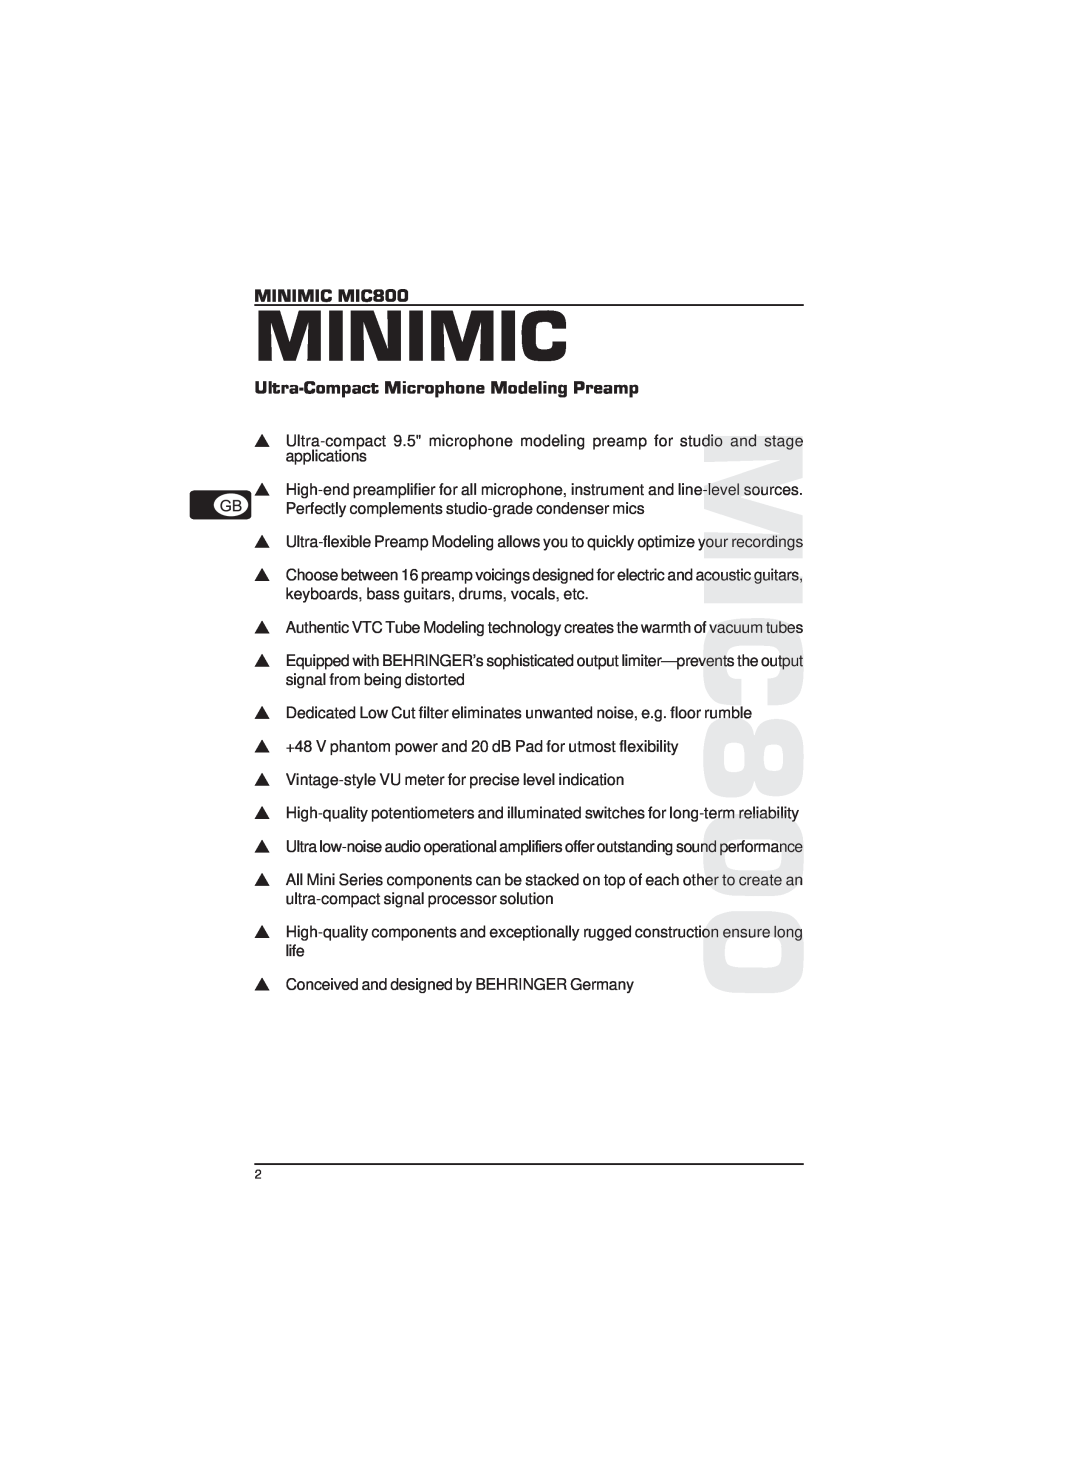 Behringer technical specifications MINIMIC MIC800, Ultra-CompactMicrophone Modeling Preamp, Minimic 